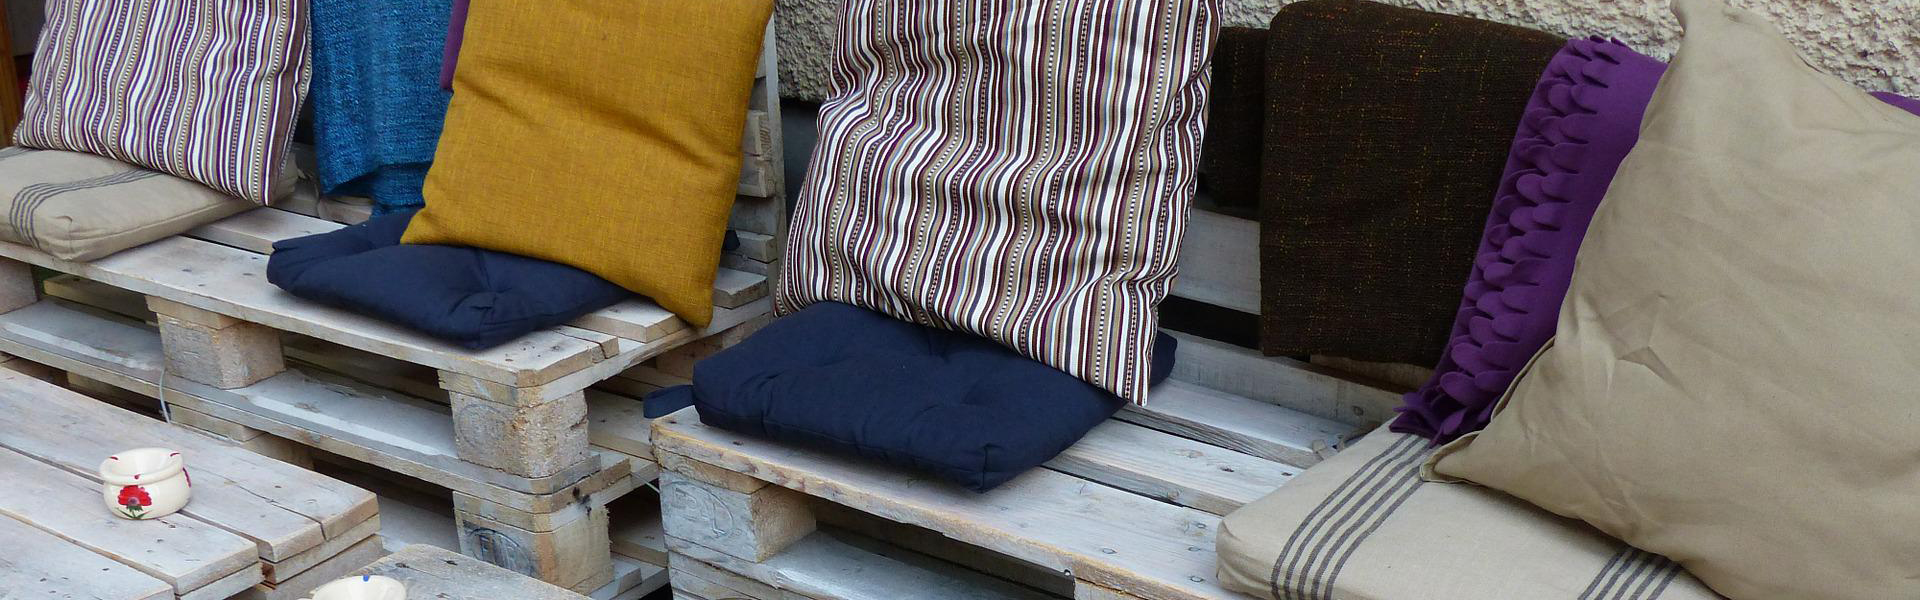 DIY Cozy Backrest Pillow with Arms - Cool Creativities